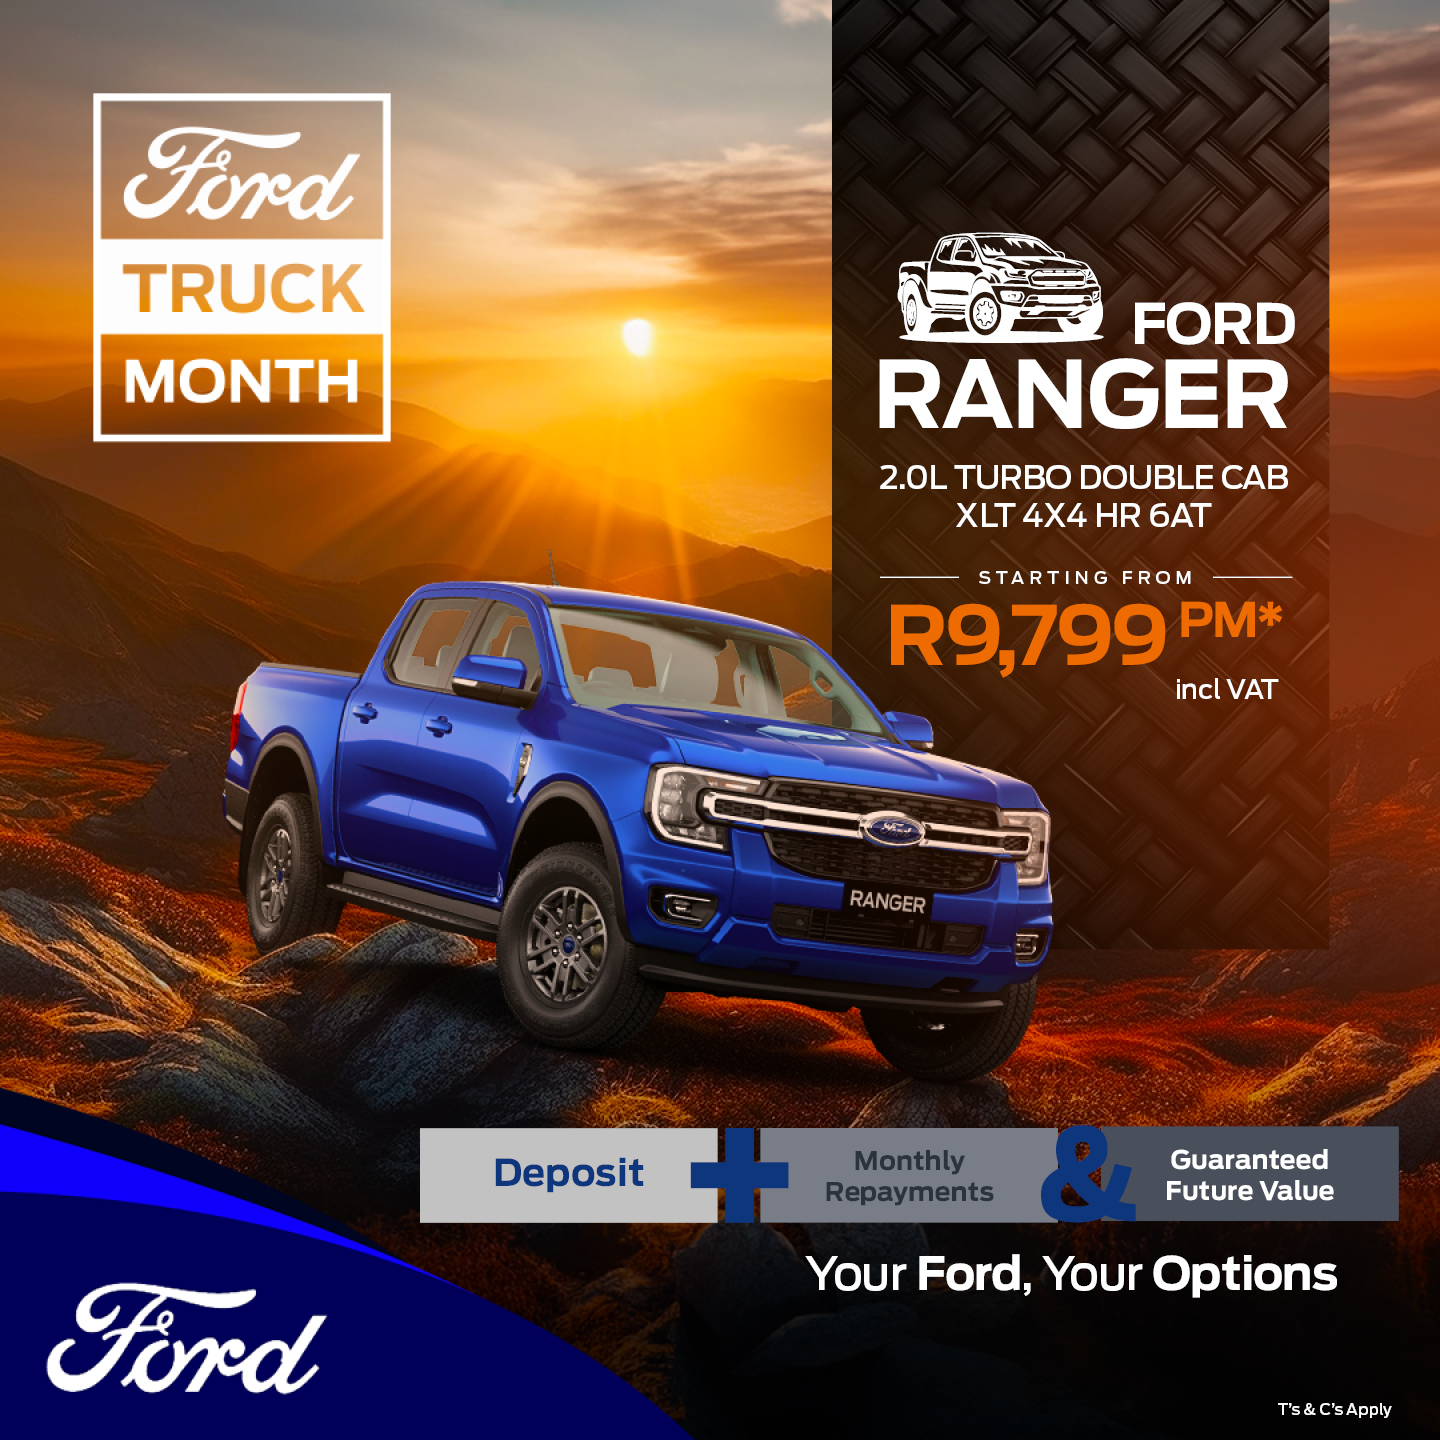 Ford Ranger 2.0L Turbo D/Cab XLT 4×4 HR 6AT image from 